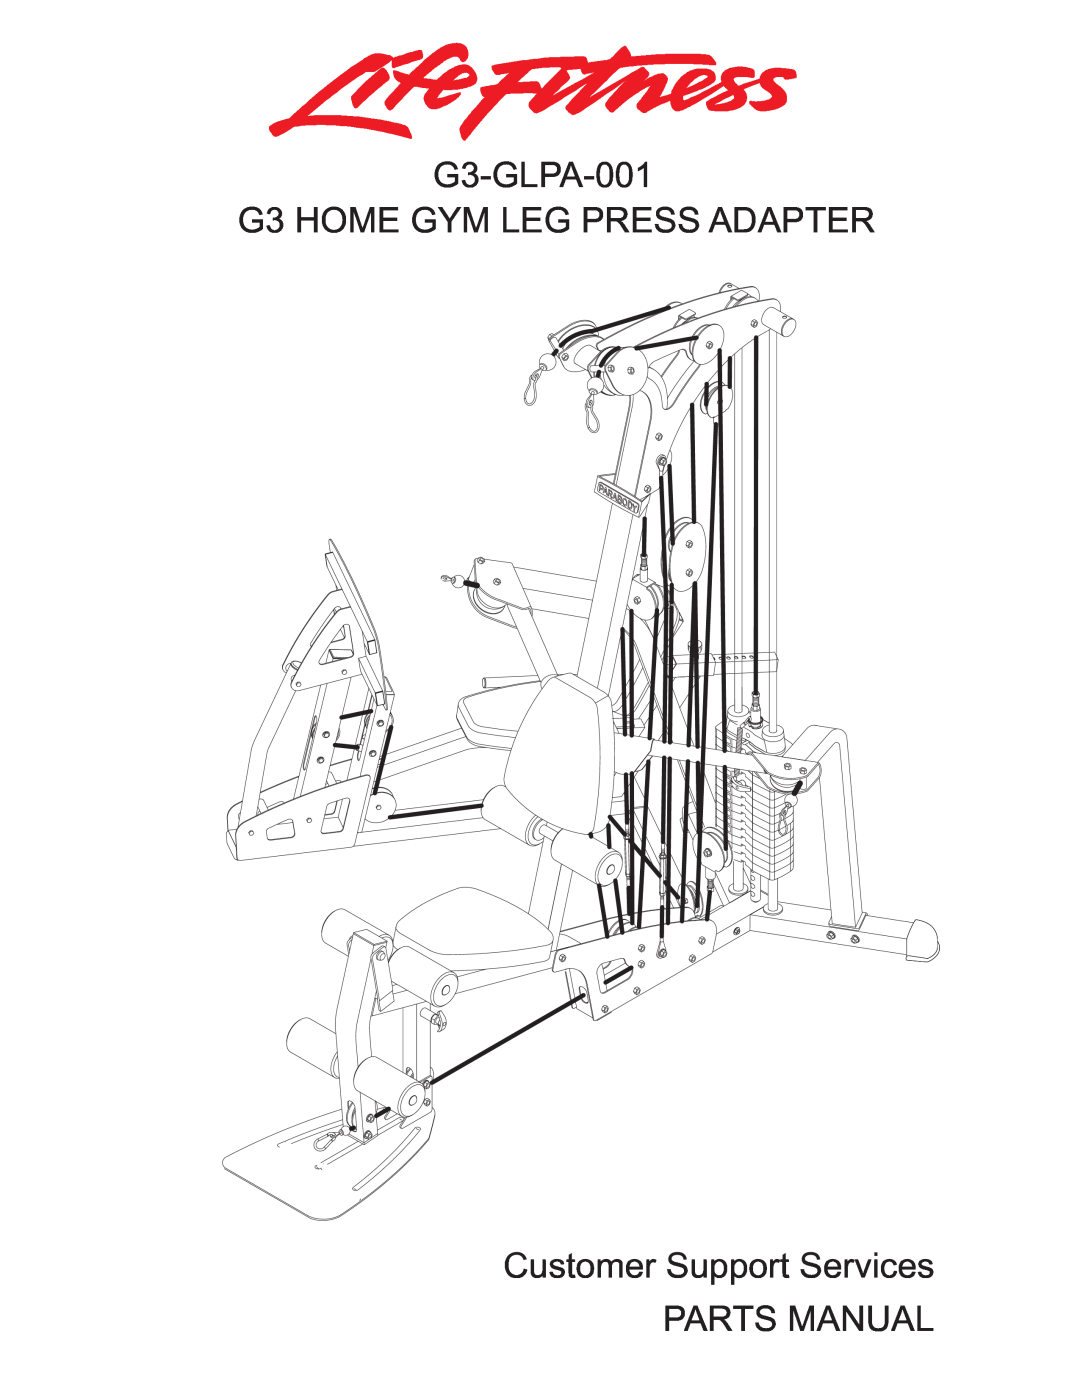 Life Fitness manual G3-GLPA-001 G3 HOME GYM LEG PRESS ADAPTER Customer Support Services, Parts Manual 